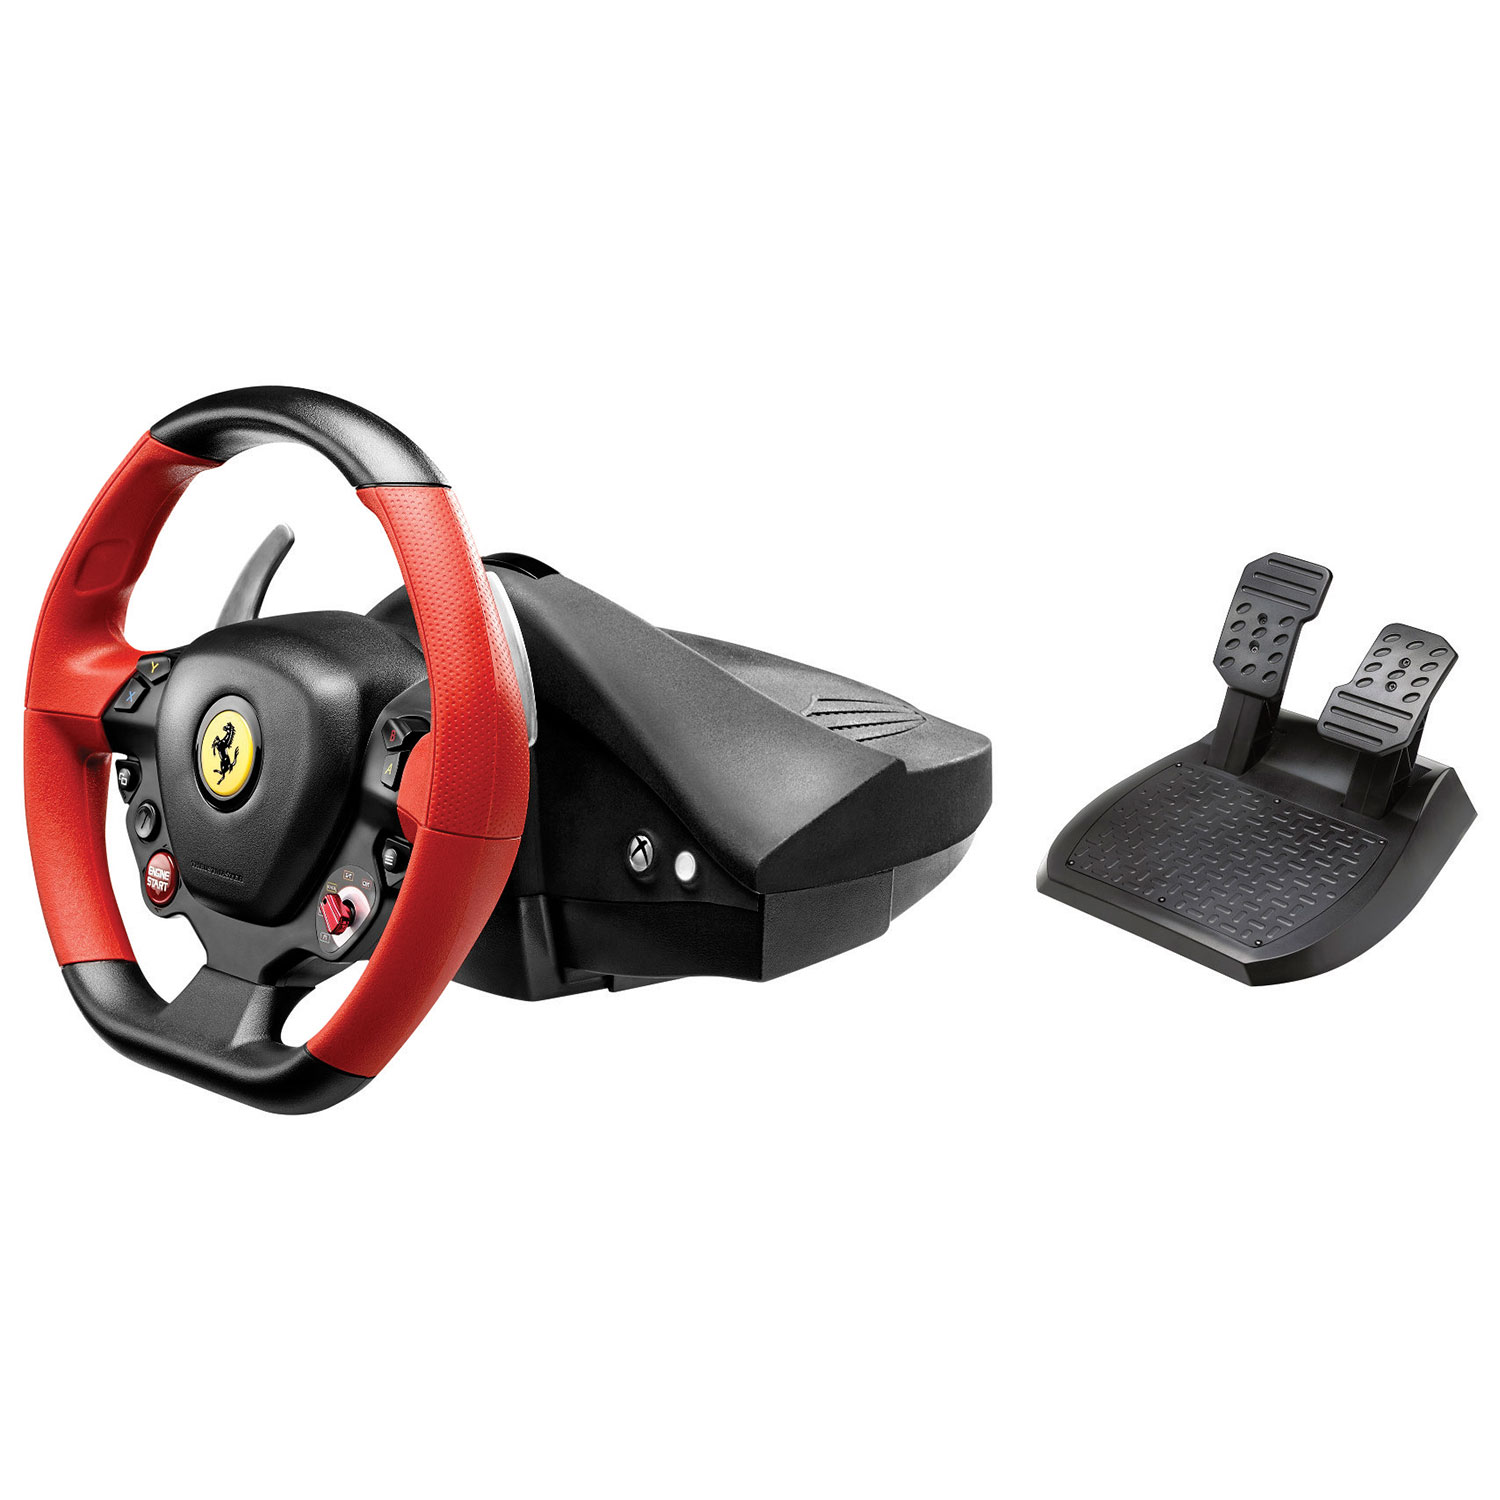 Thrustmaster Racing Wheel Ferrari 458 Spider Edition for Xbox Series X|S &  Xbox One/PC